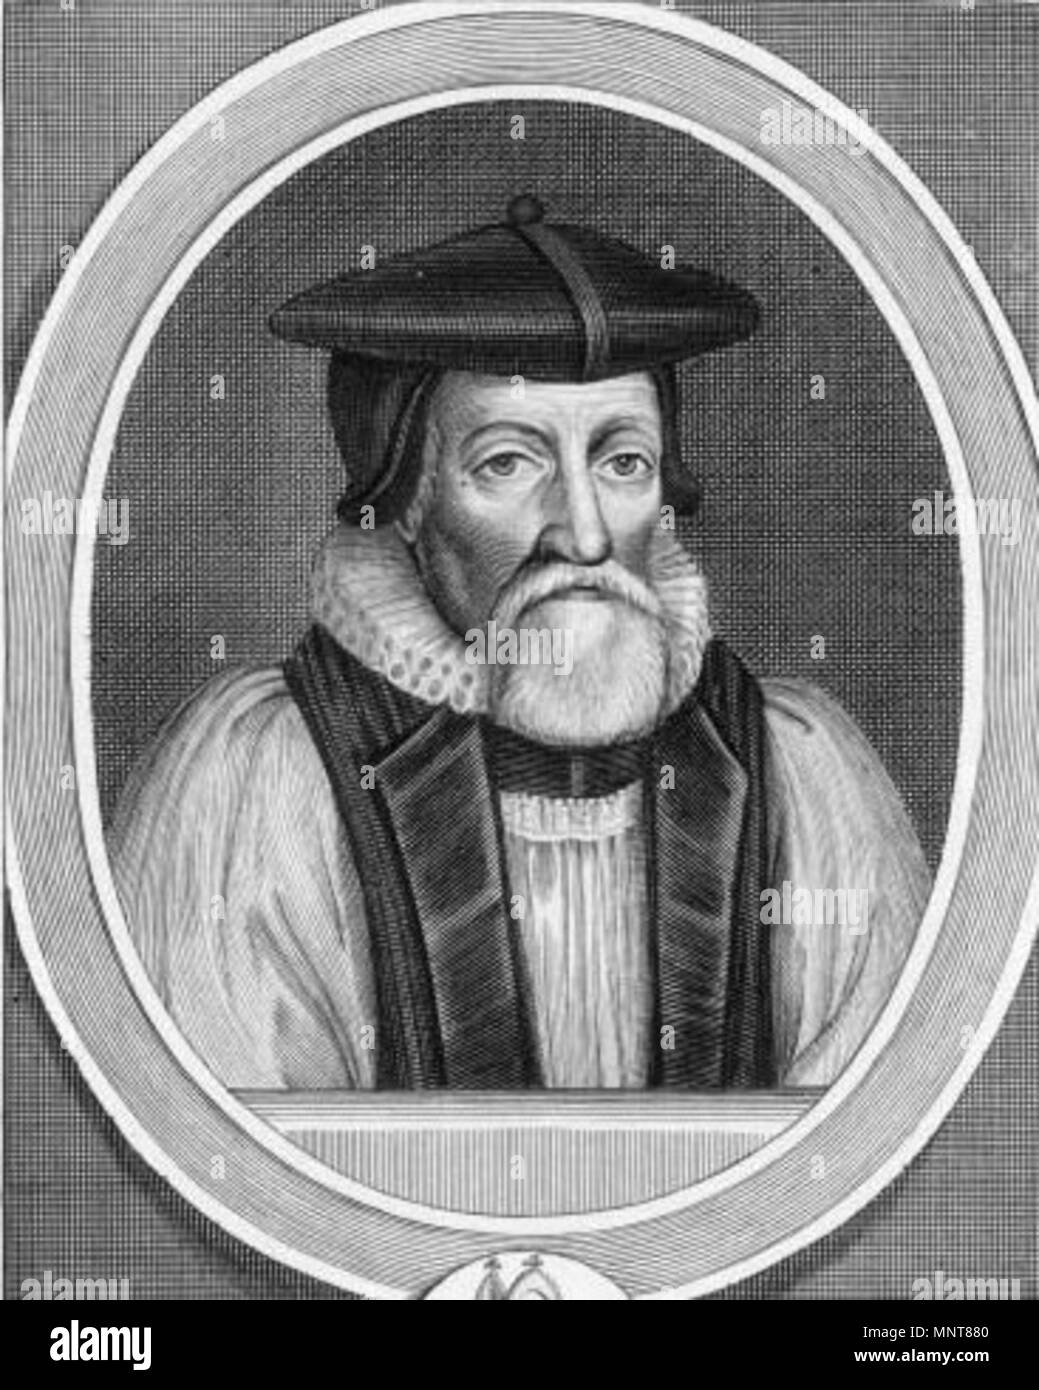 .  English: Thomas Morton (1564-1659) . 1820. Nineteenth century copy by T. Berry of seventeenth century original engraving by   William Faithorne  (1616–1691)    Alternative names William, the elder Faithorne; William,The Elder Faithorne; William Faithorne the Elder; William Faithorne The Elder  Description British painter, printmaker and printseller father of William Faithorne the Younger  Date of birth/death 1616 13 May 1691  Location of birth/death Greater London Greater London  Work location London  Authority control  : Q3568608 VIAF: 284244 ISNI: 0000 0000 8079 797X ULAN: 500115446 LCCN: Stock Photo